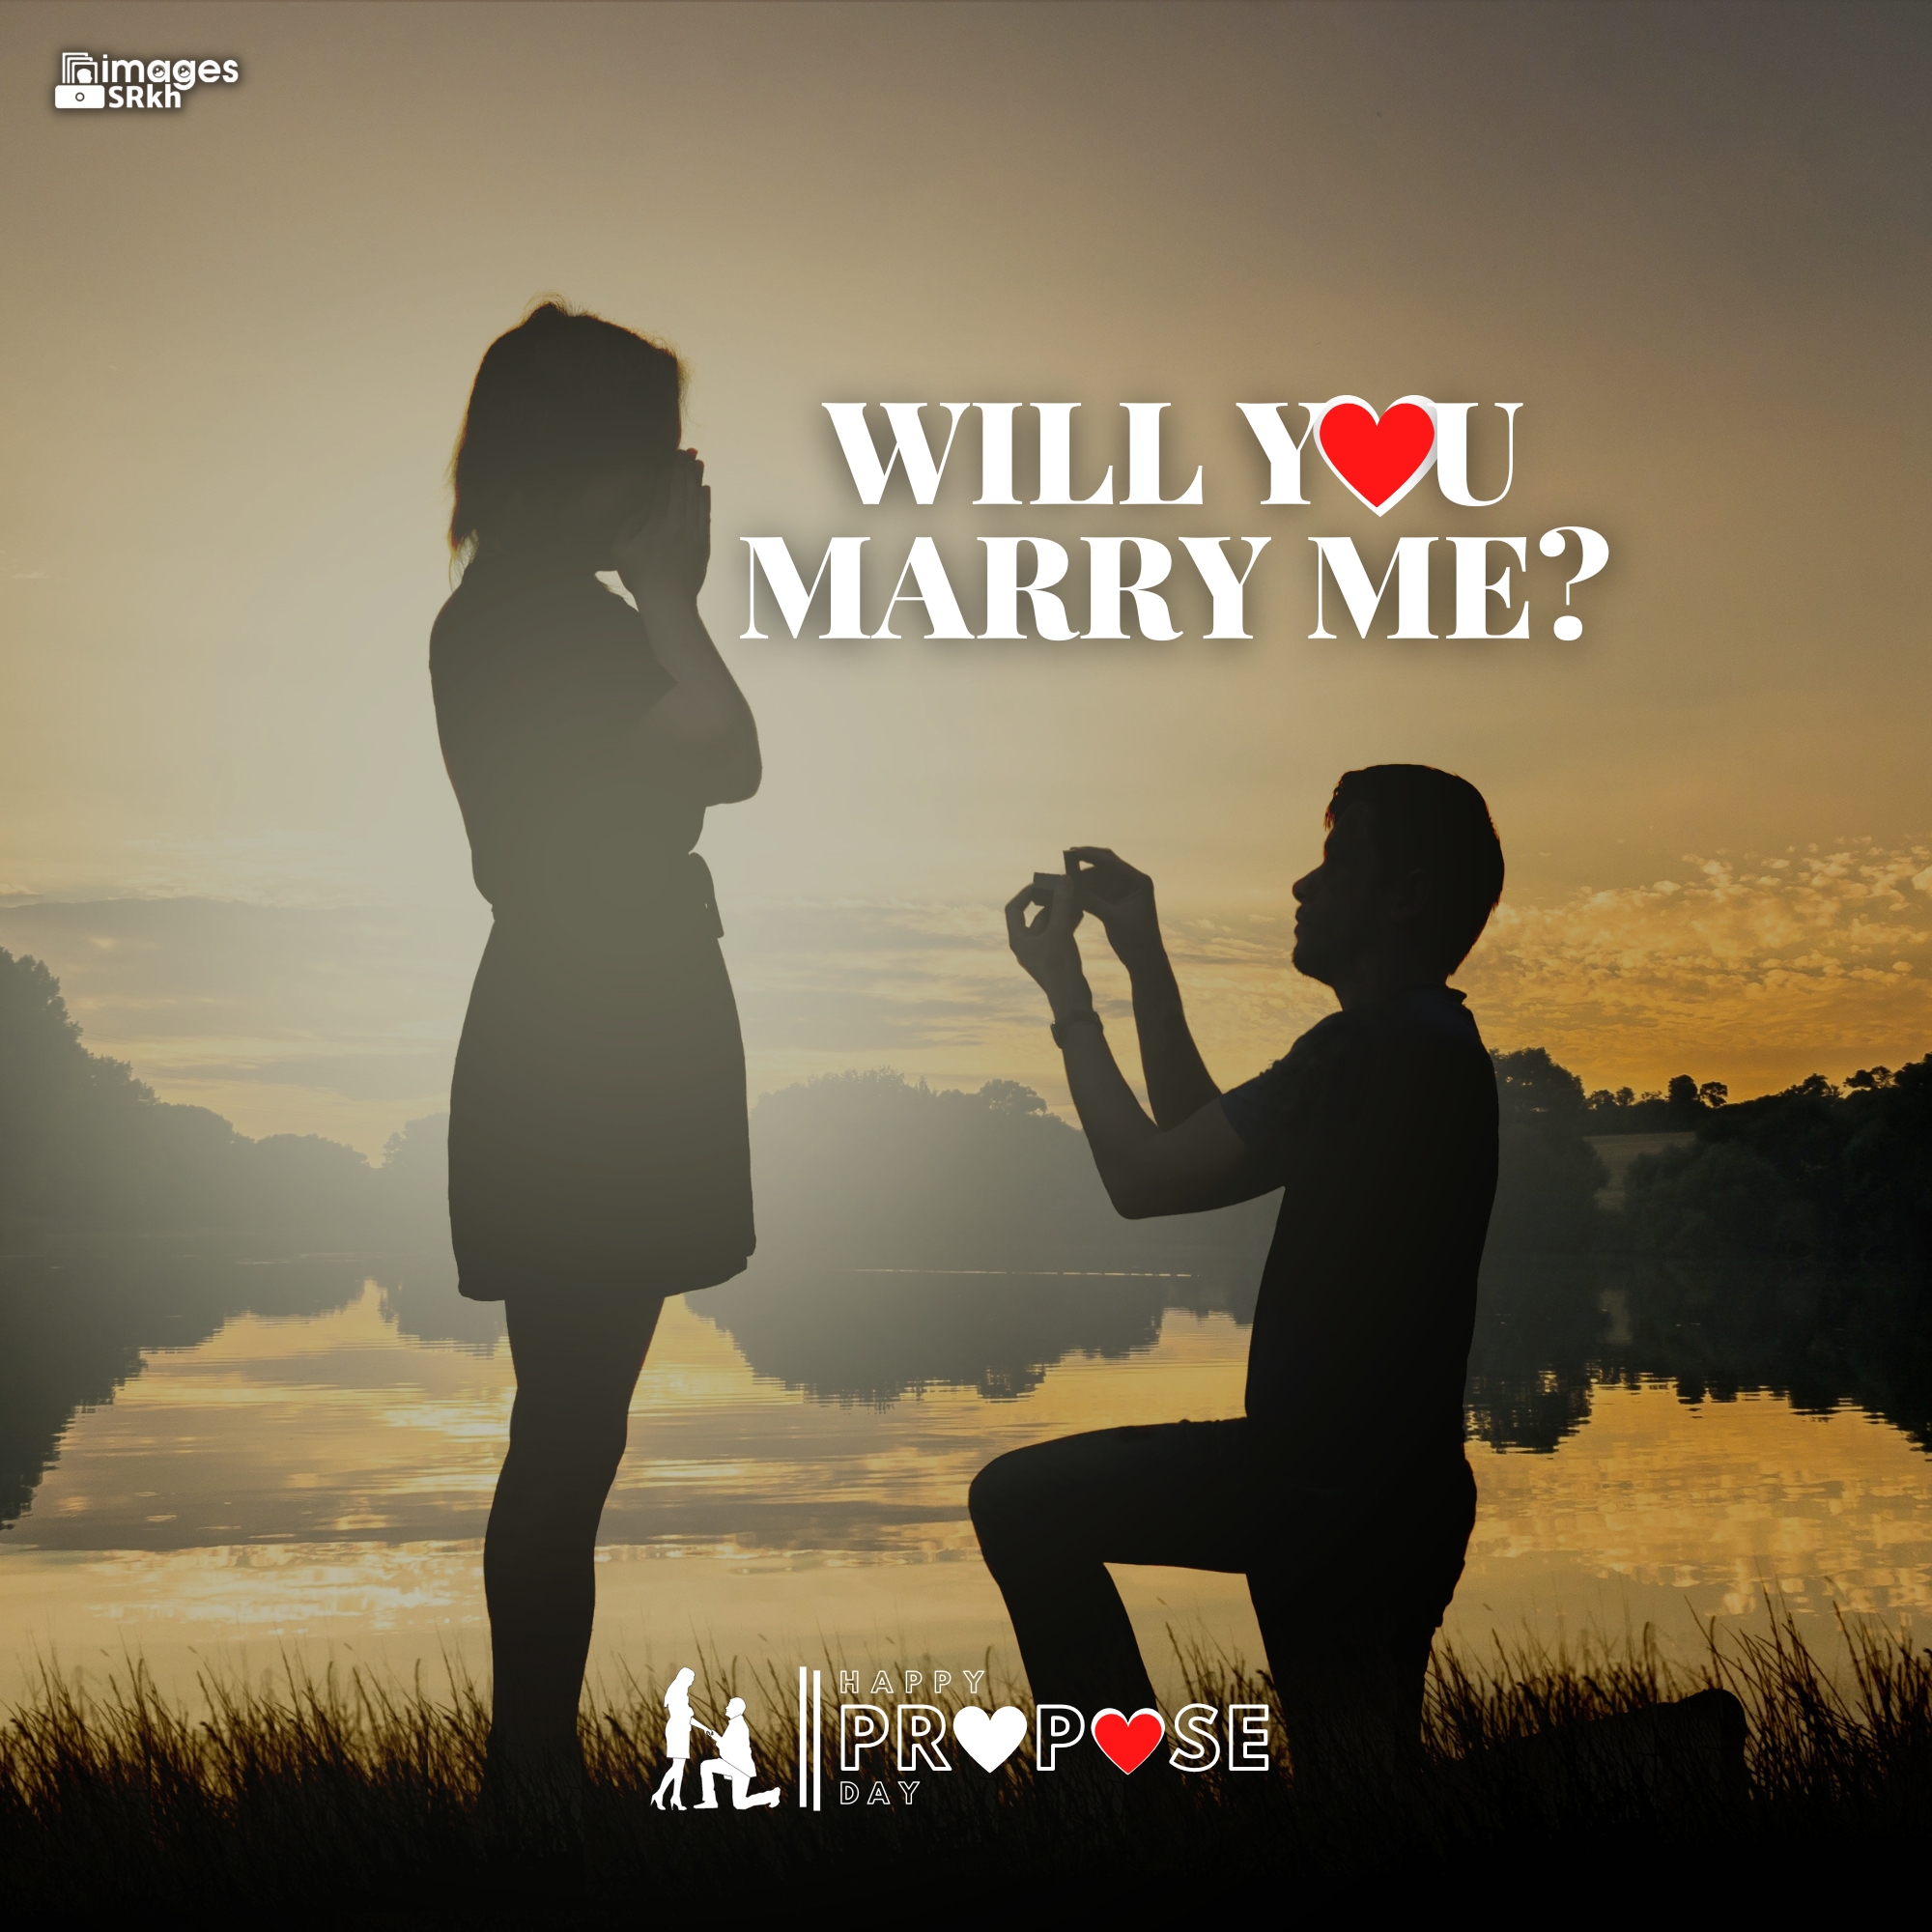 Propose Day Images | 282 | Will You MARRY ME